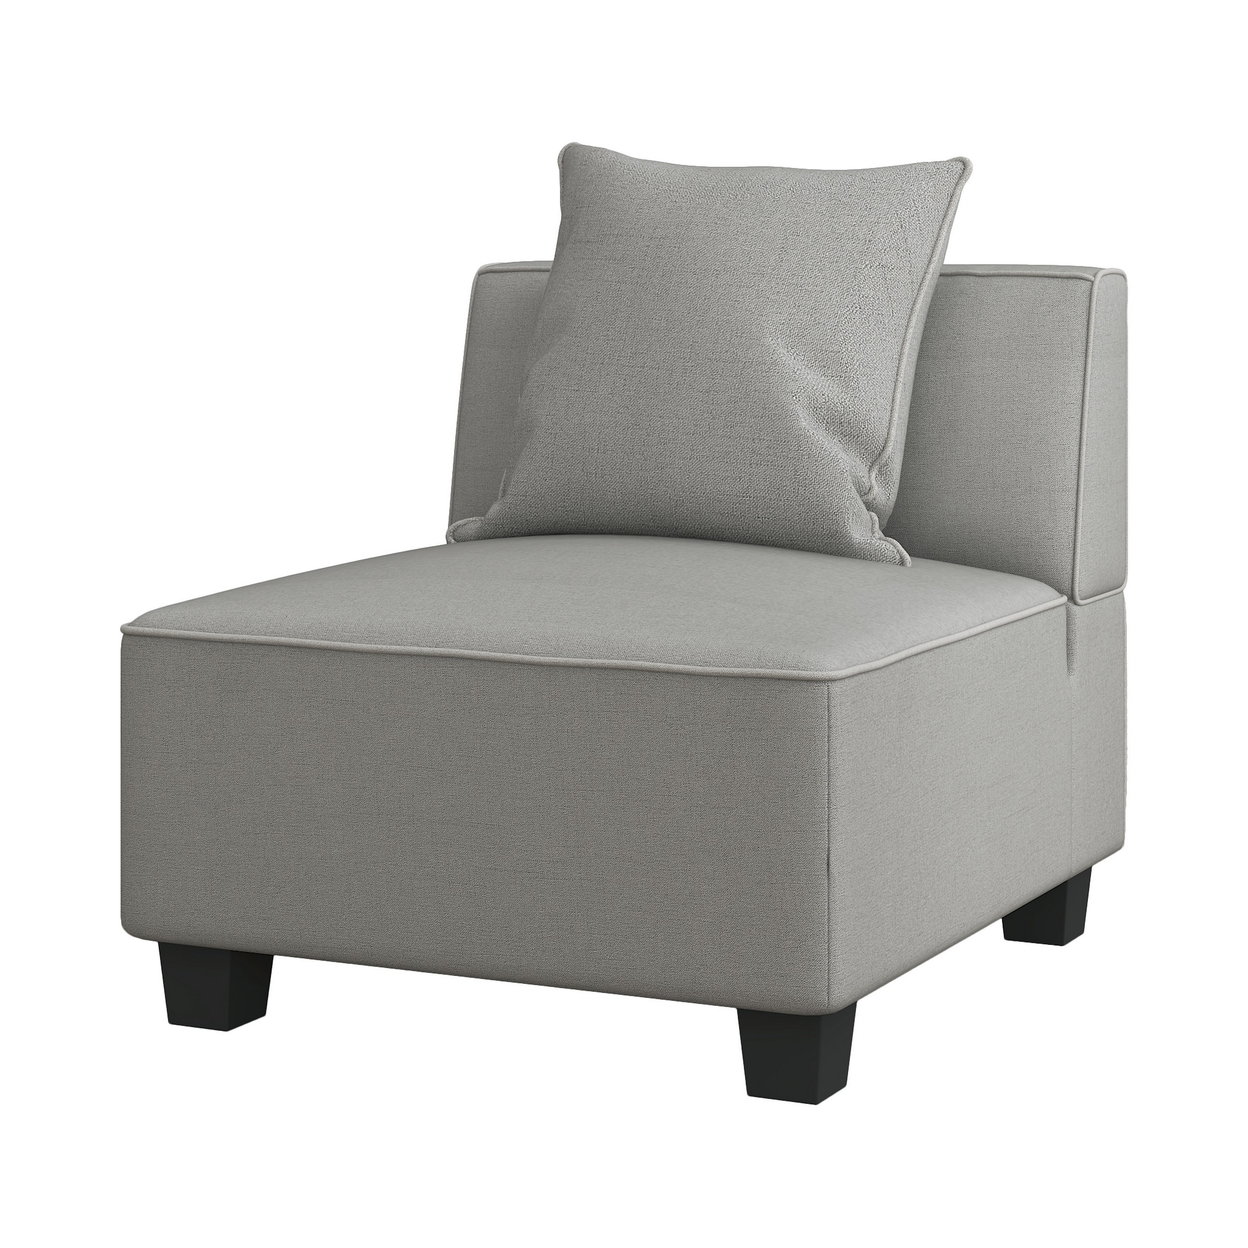 Jake 34 Inch Armless Chair, Gray Textured Polyester, Tapered Wooden Feet- Saltoro Sherpi